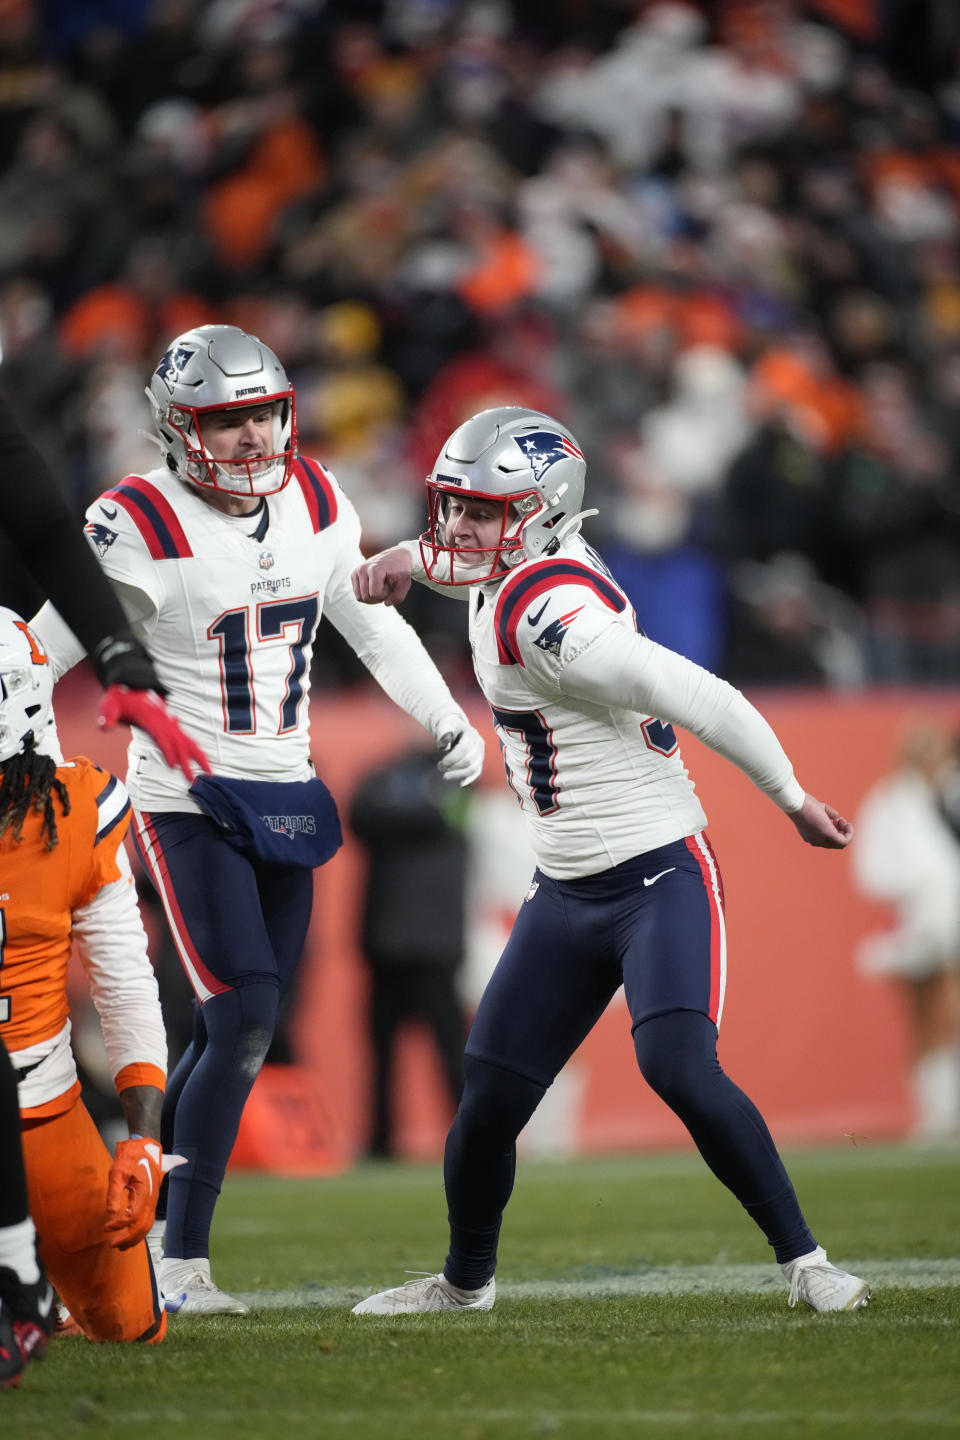 New England Patriots place-kicker Chad Ryland (37) reacts after kicking the game winning field goal with seconds left during the second half of an NFL football game against the Denver Broncos, Sunday, Dec. 24, 2023, in Denver. (AP Photo/David Zalubowski)